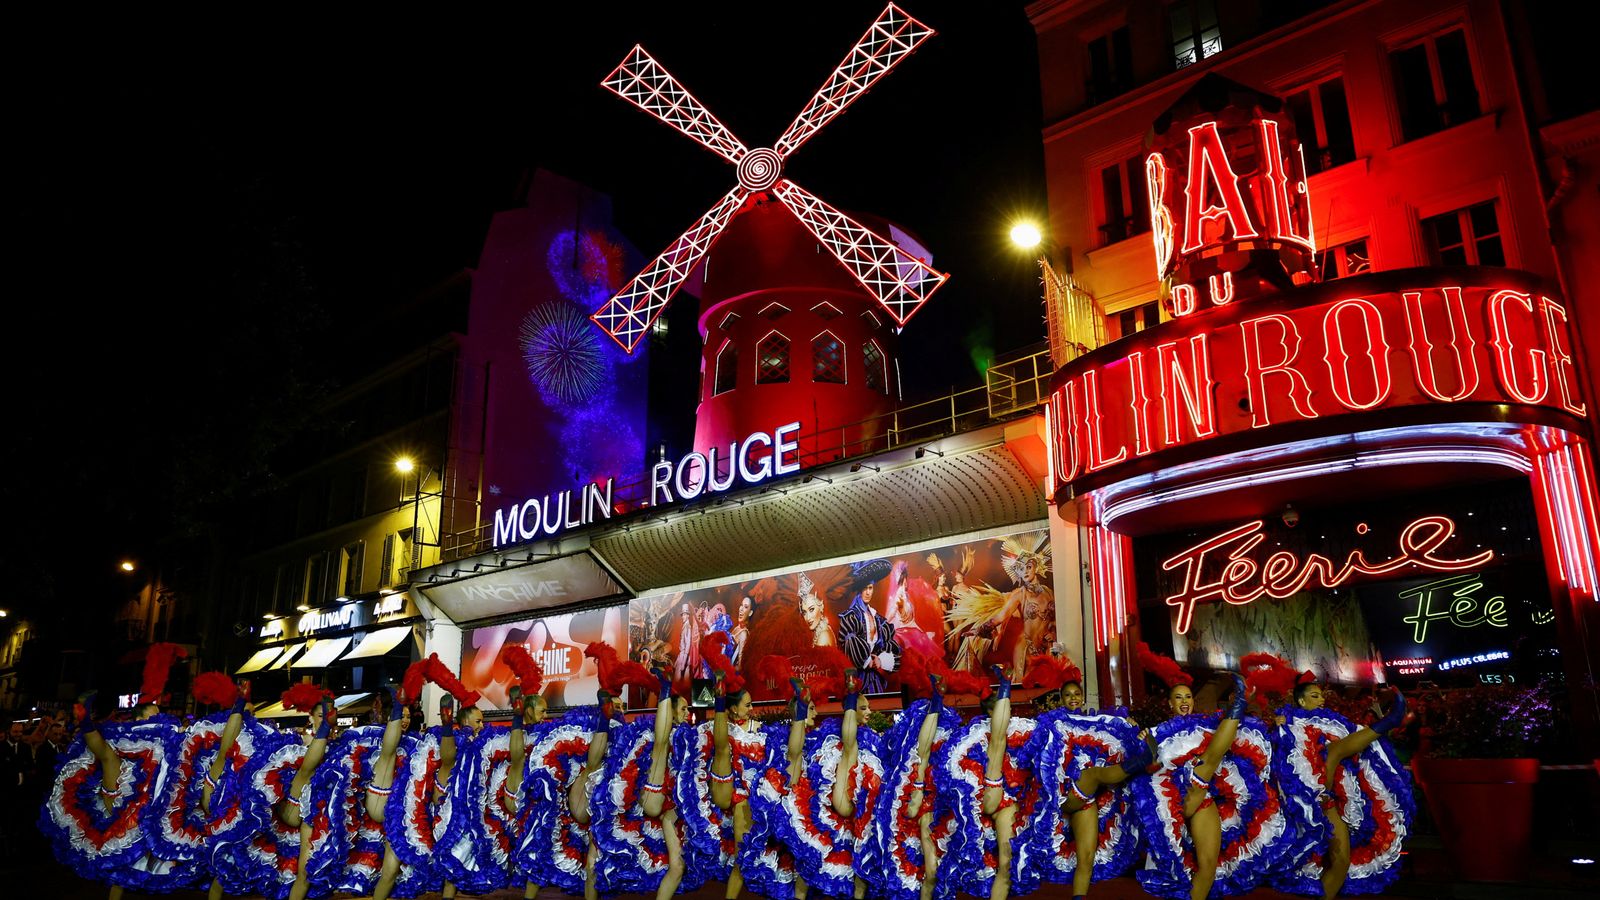 Moulin Rouge windmill restored after collapse - in time for Olympics